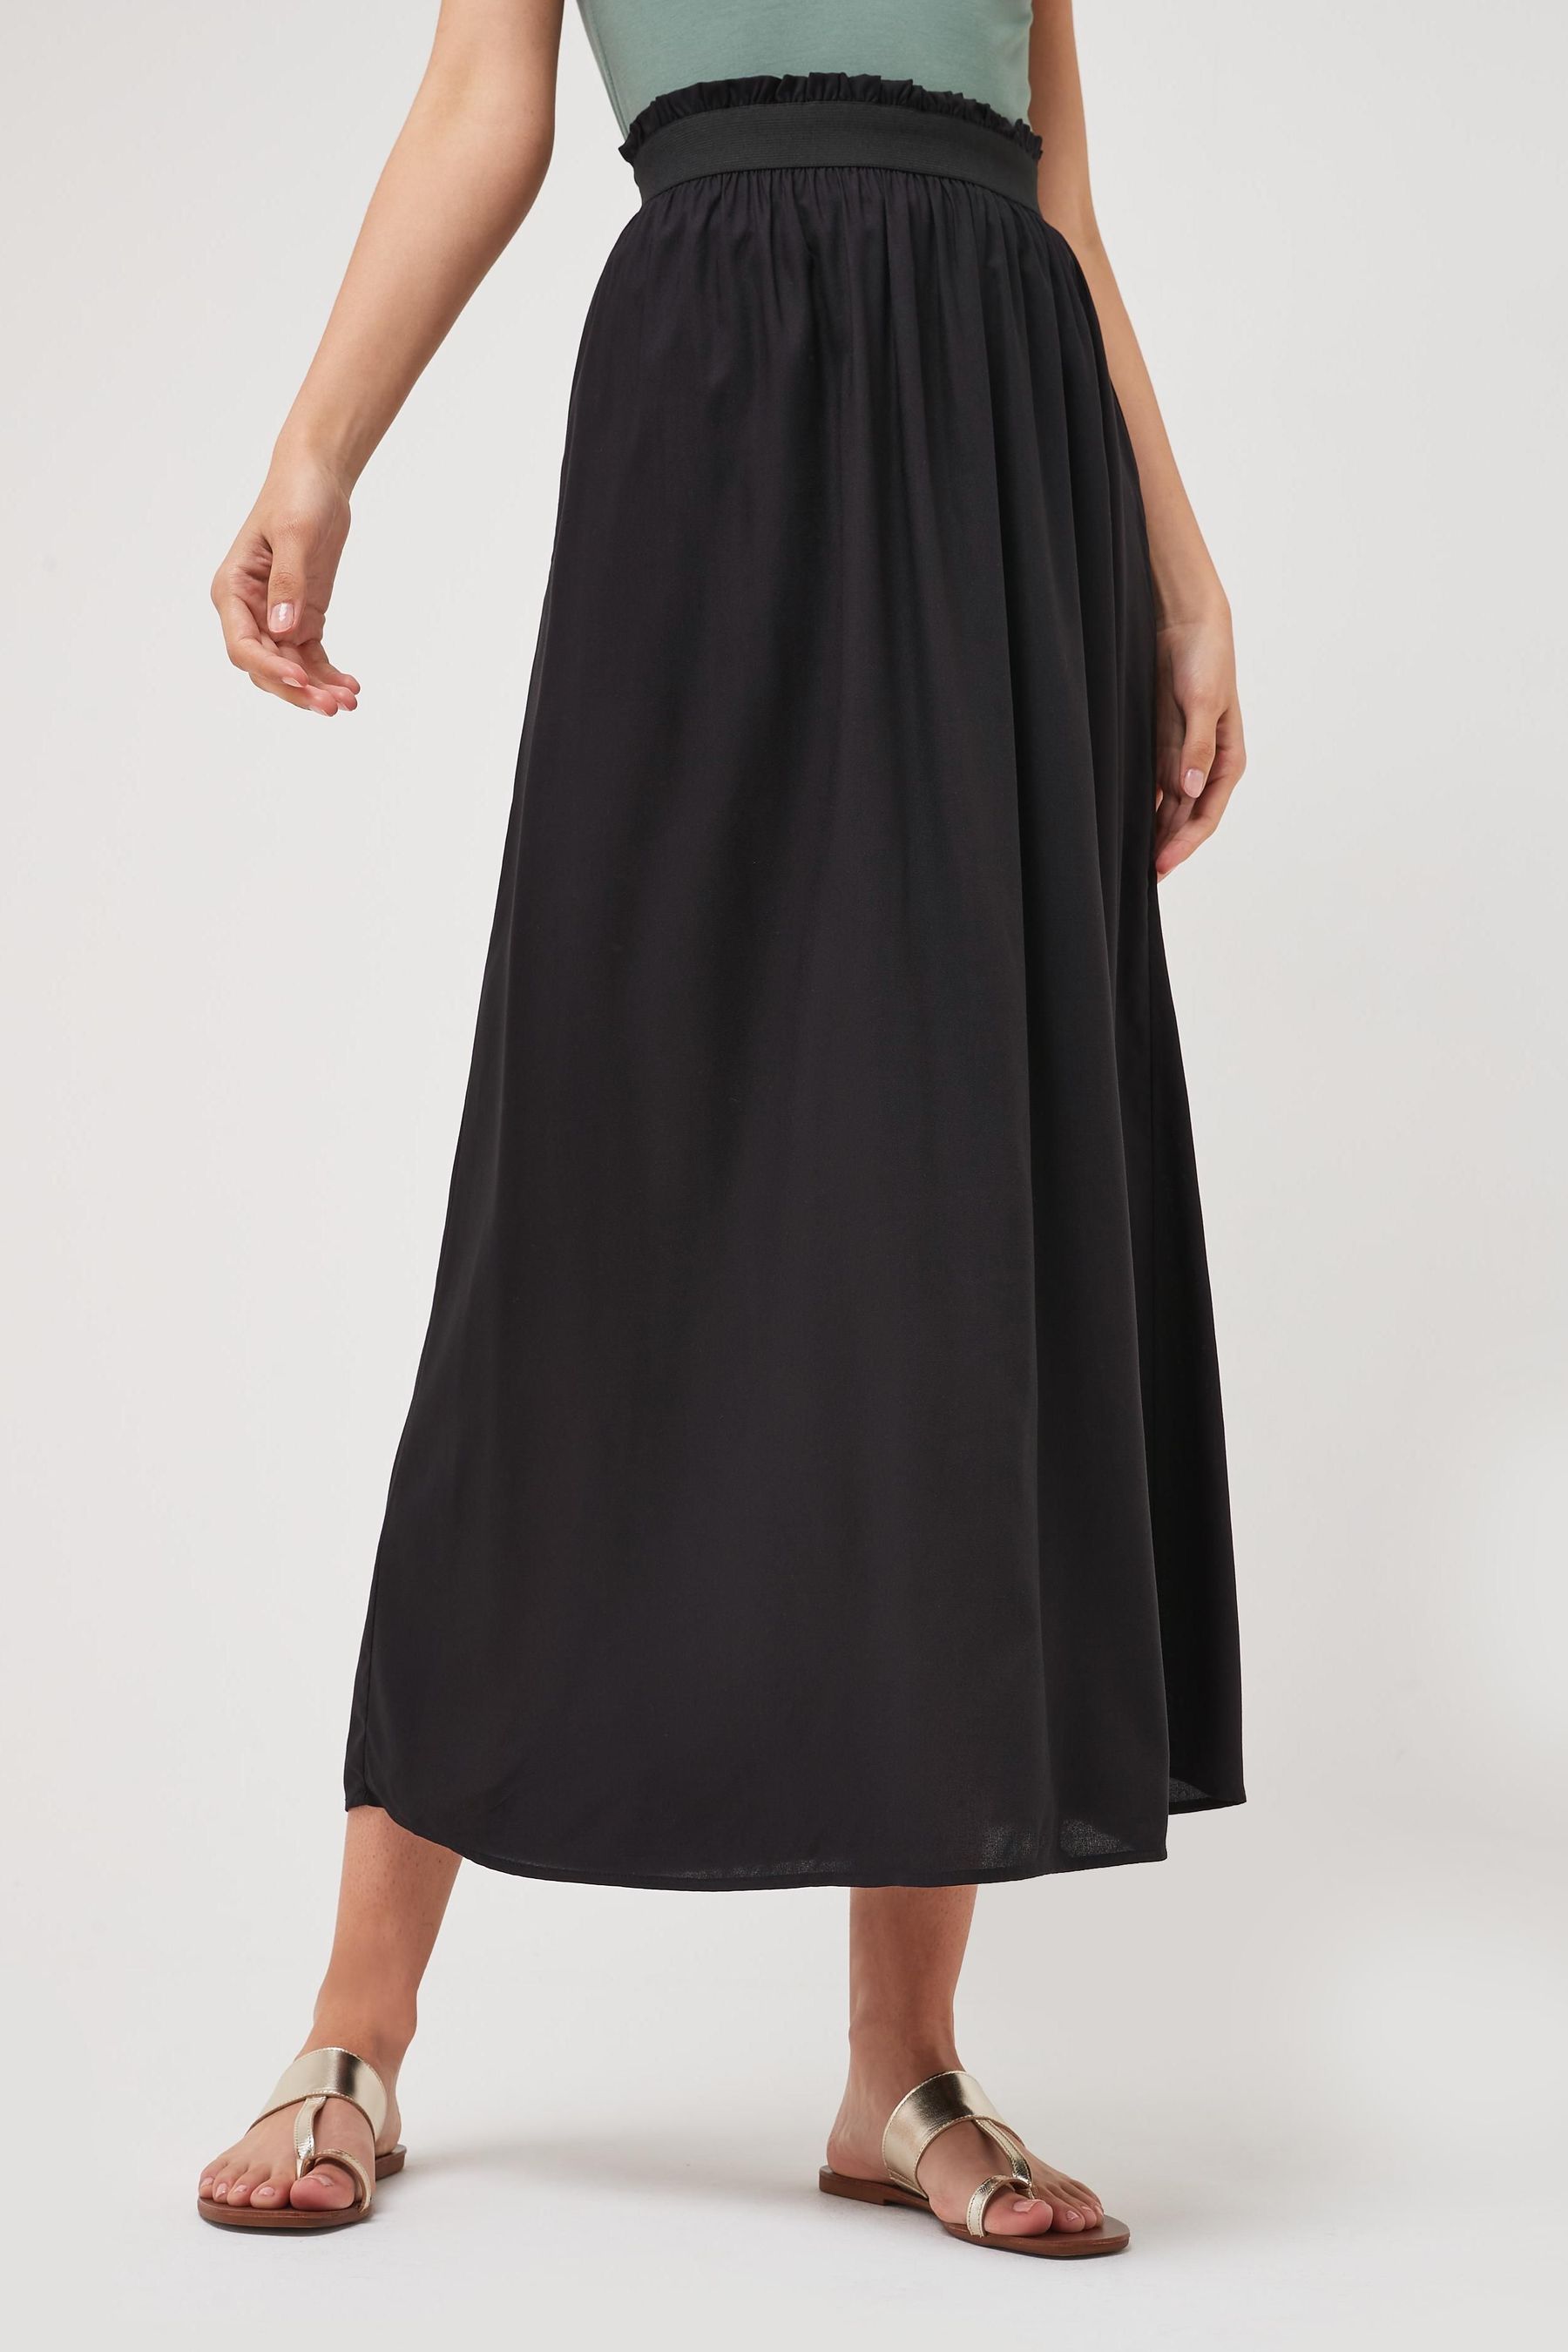 Buy Only Jersey Maxi Skirt from Next Australia